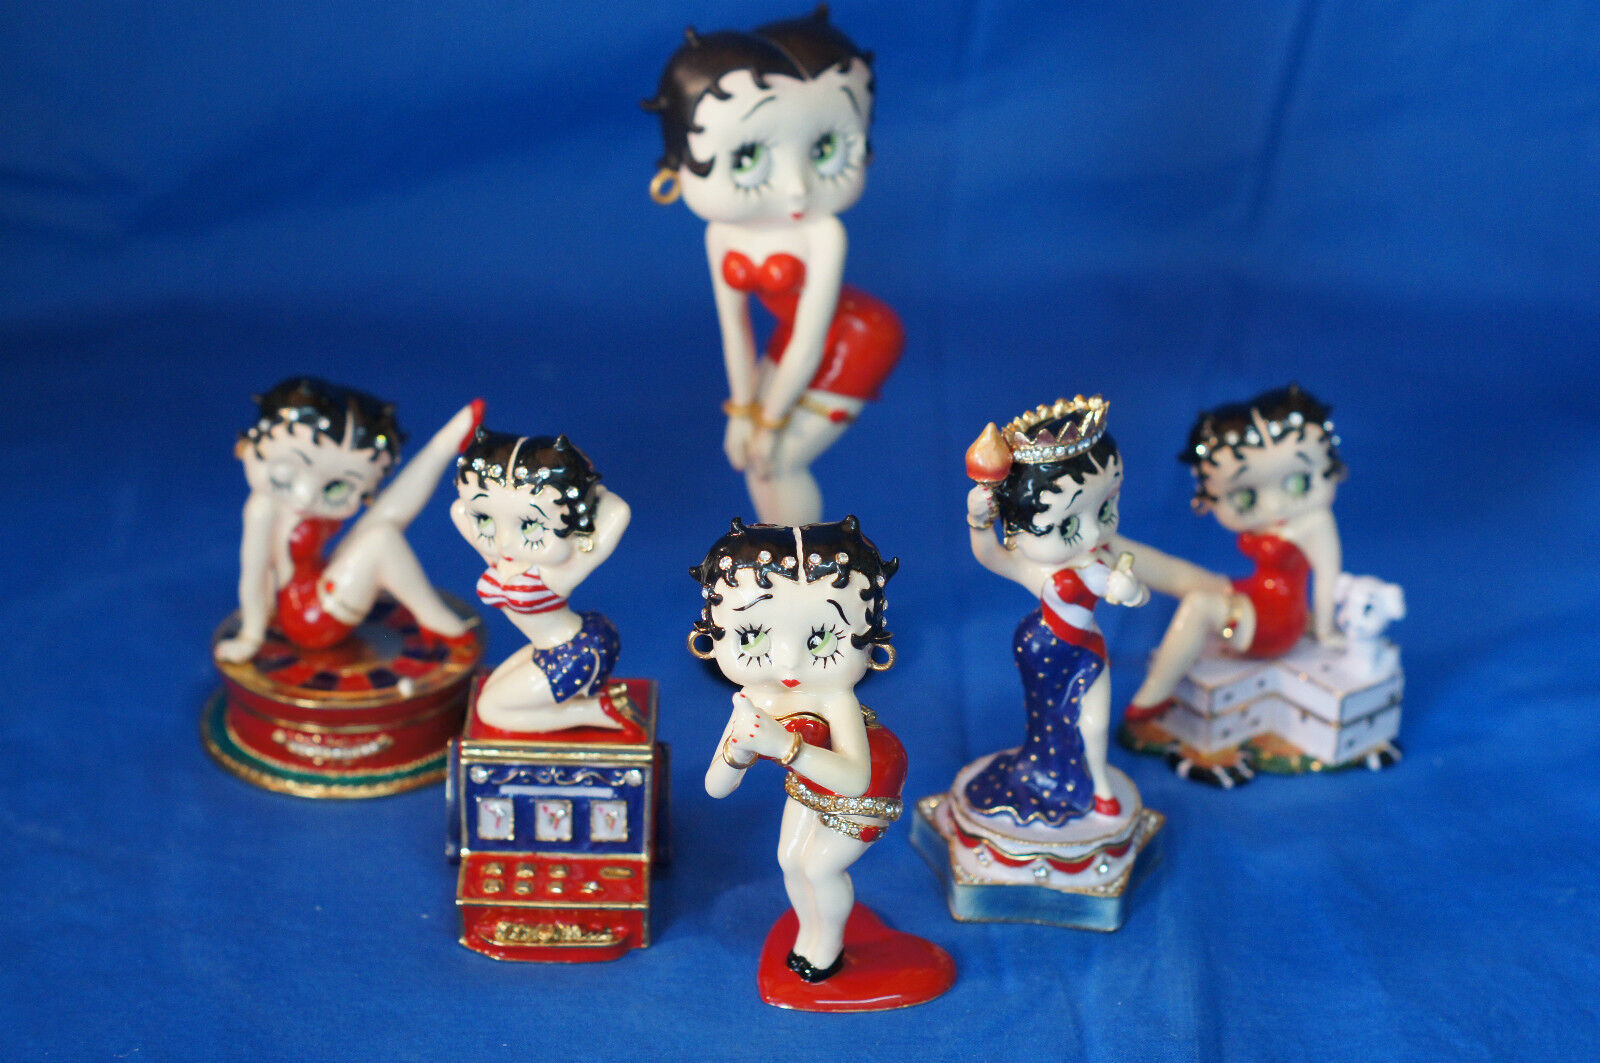 Betty Boop Hinged Metal Treasure Box LE Set of 6 Different Figurines PHB Retired